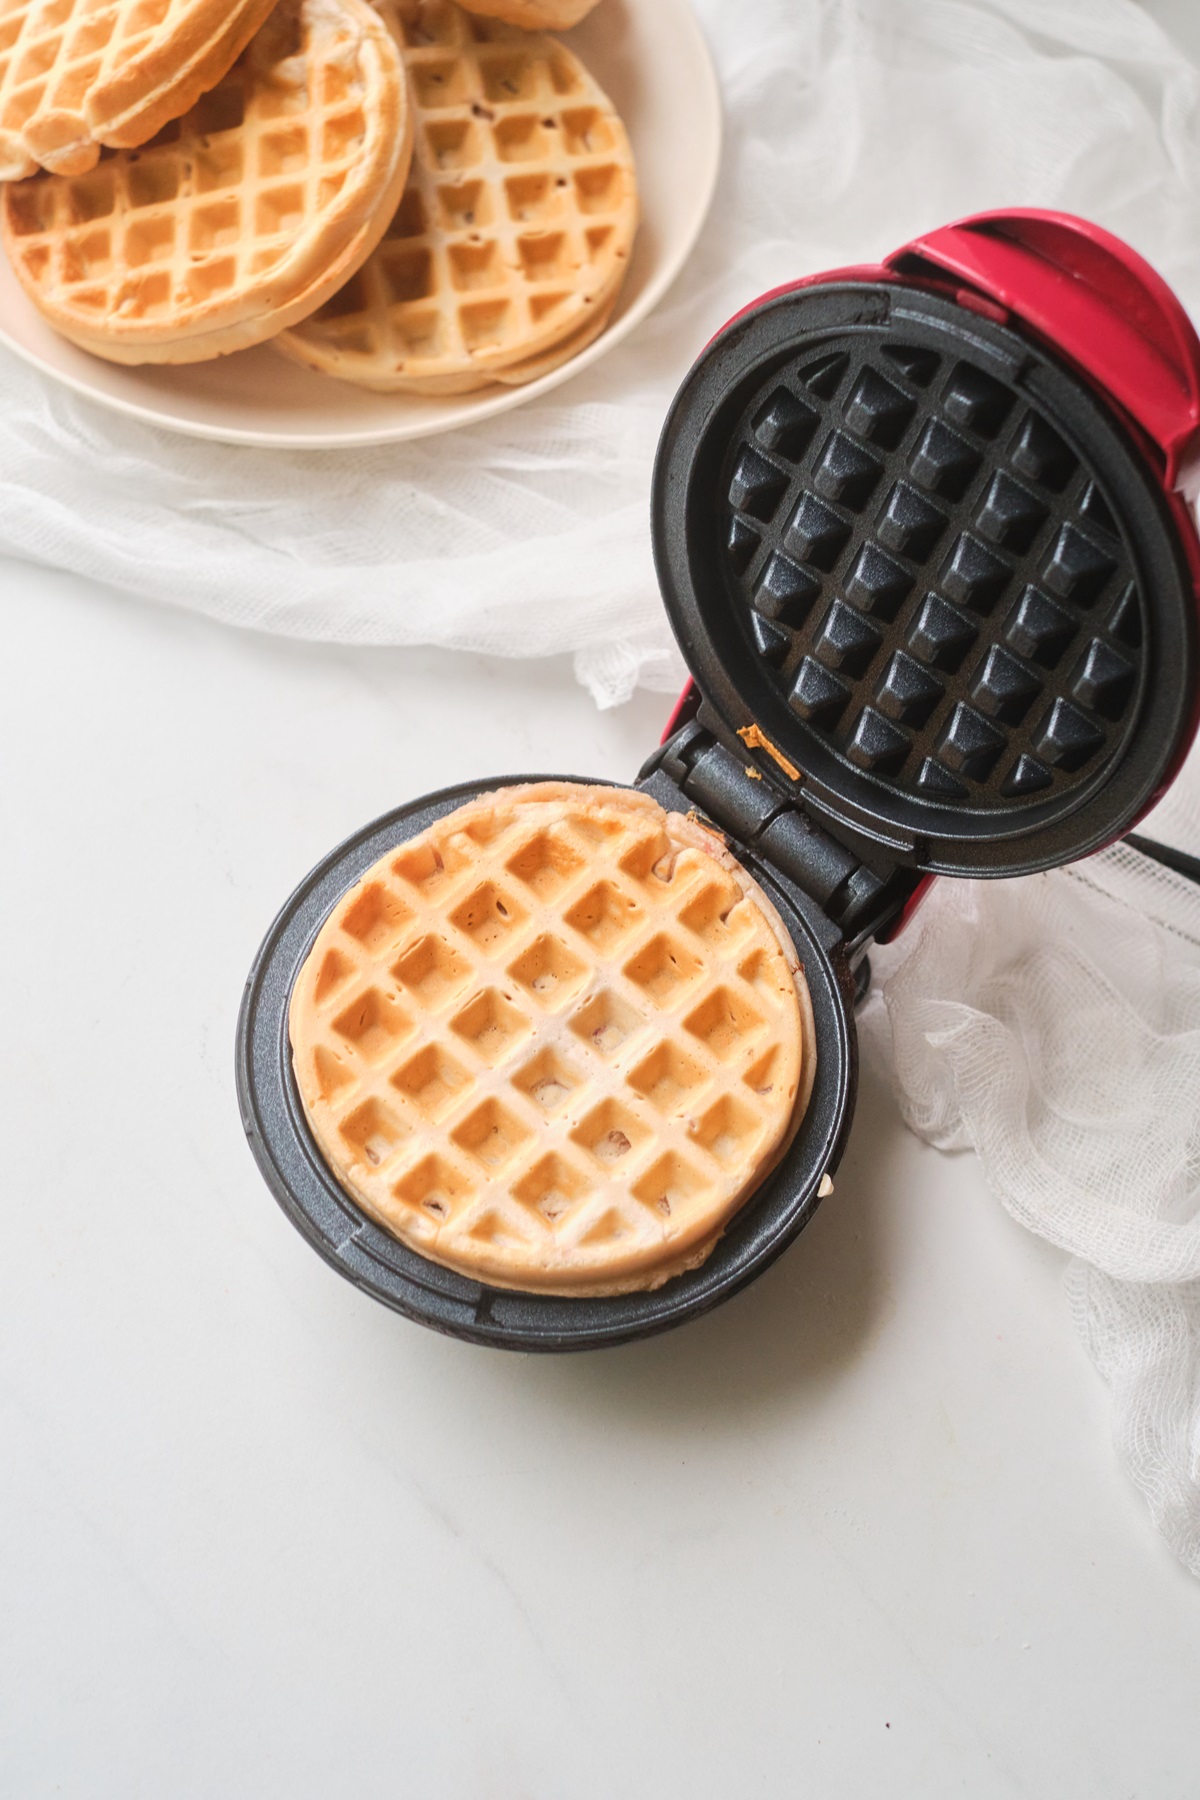 A waffle being made in a mini waffle iron.